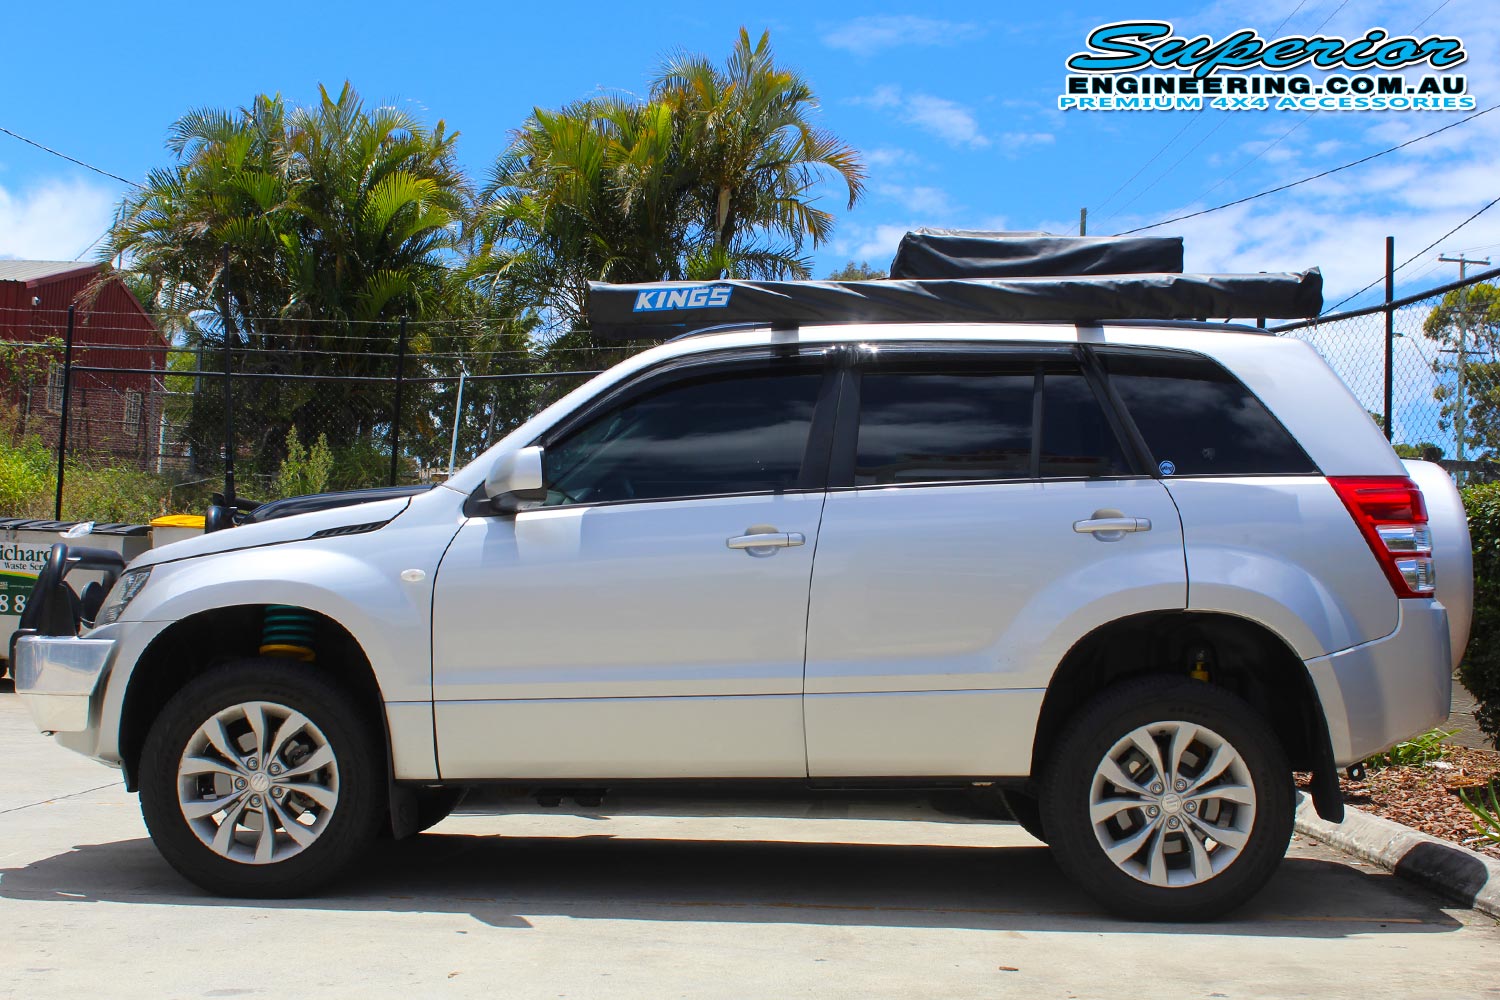 Left side view of a silver suzuki grand vitara wagon fitted with a 40mm Dobinson lift kit at the Superior 4x4 retail showroom